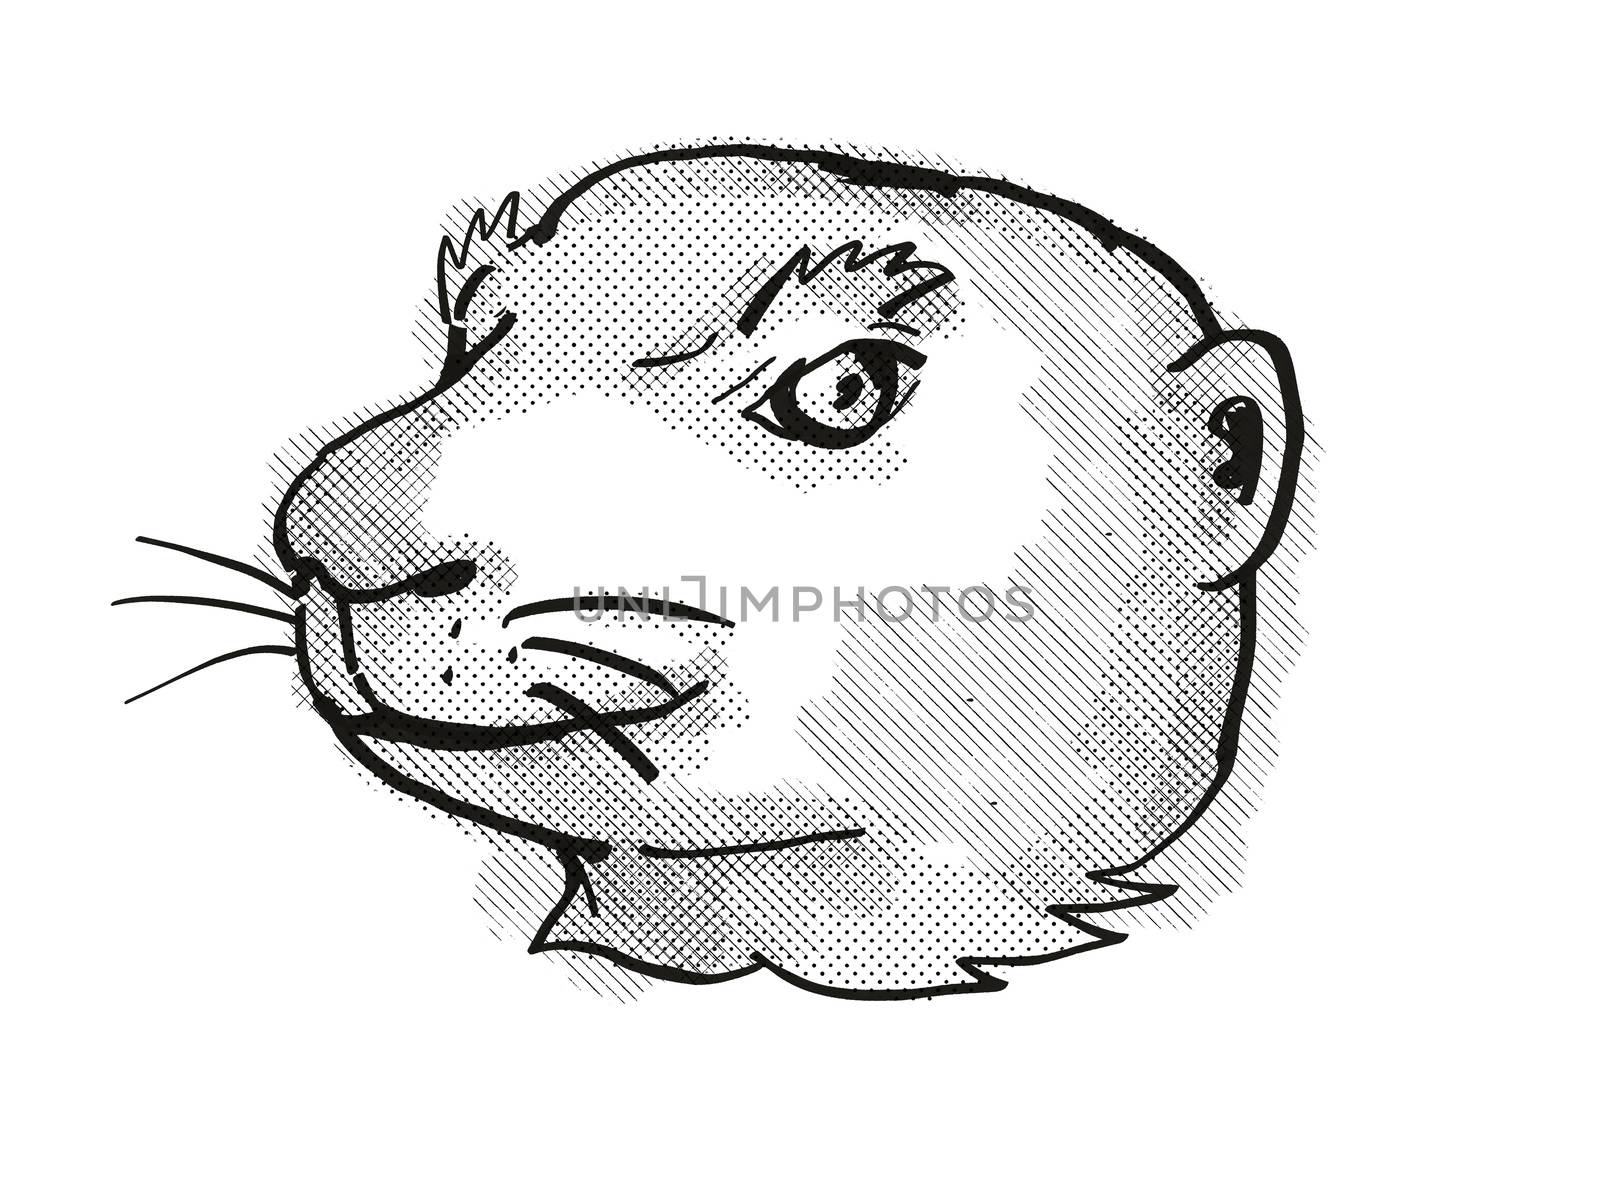 Retro cartoon style drawing of head of a Utah Prairie Dog, an endangered wildlife species on isolated white background done in black and white.